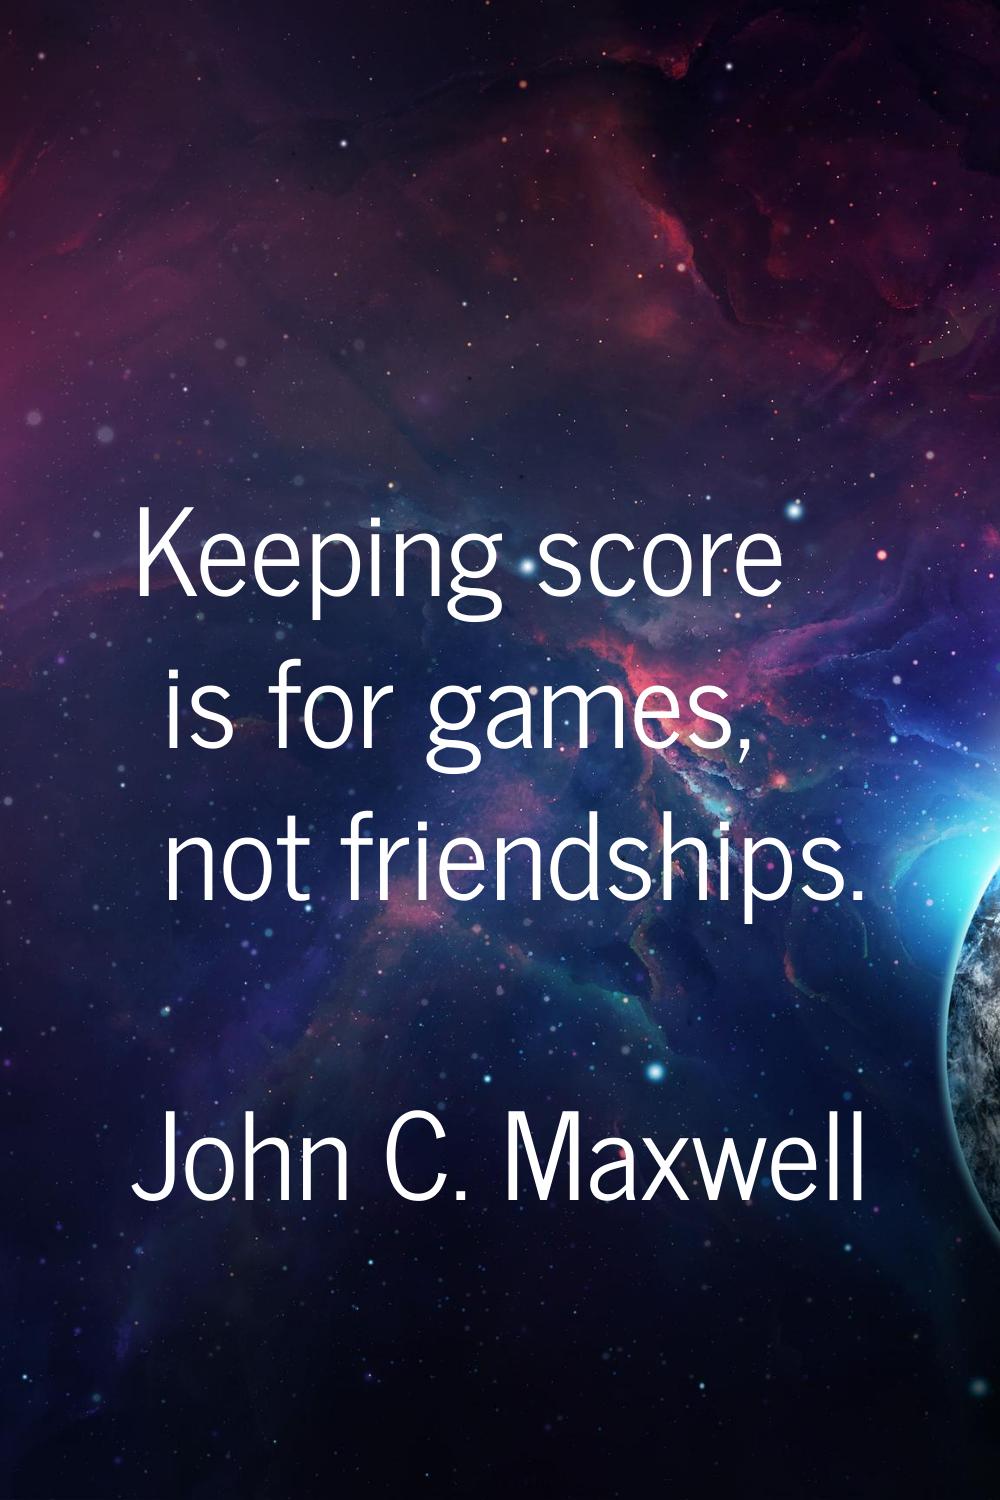 Keeping score is for games, not friendships.